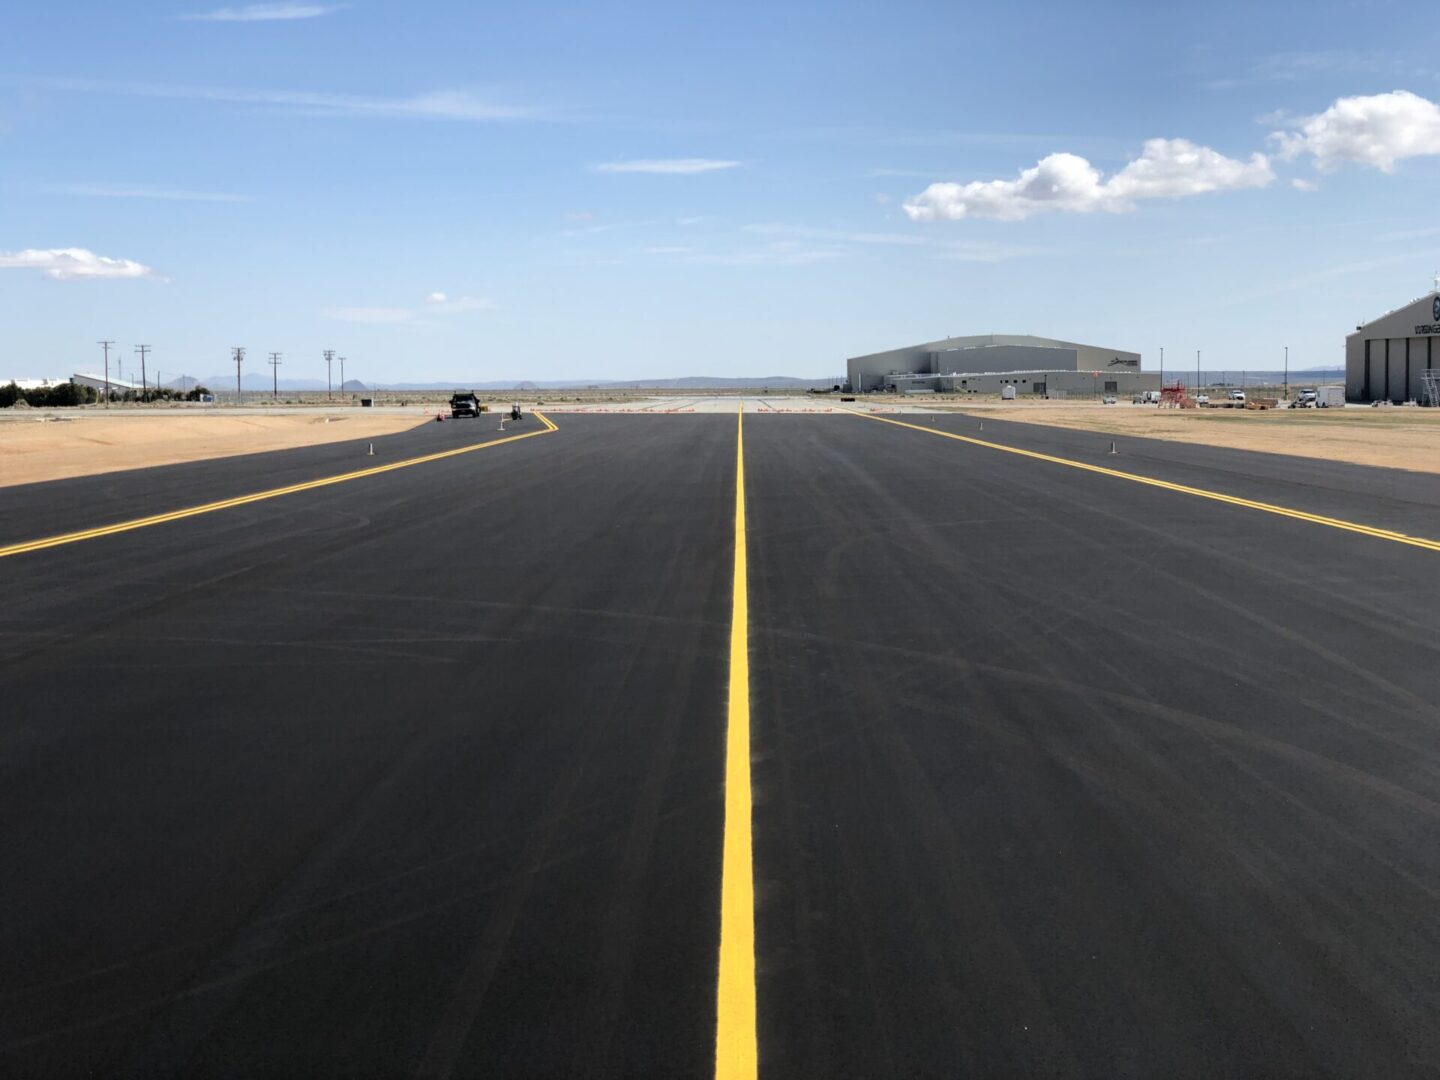 Airport runway with yellow markings